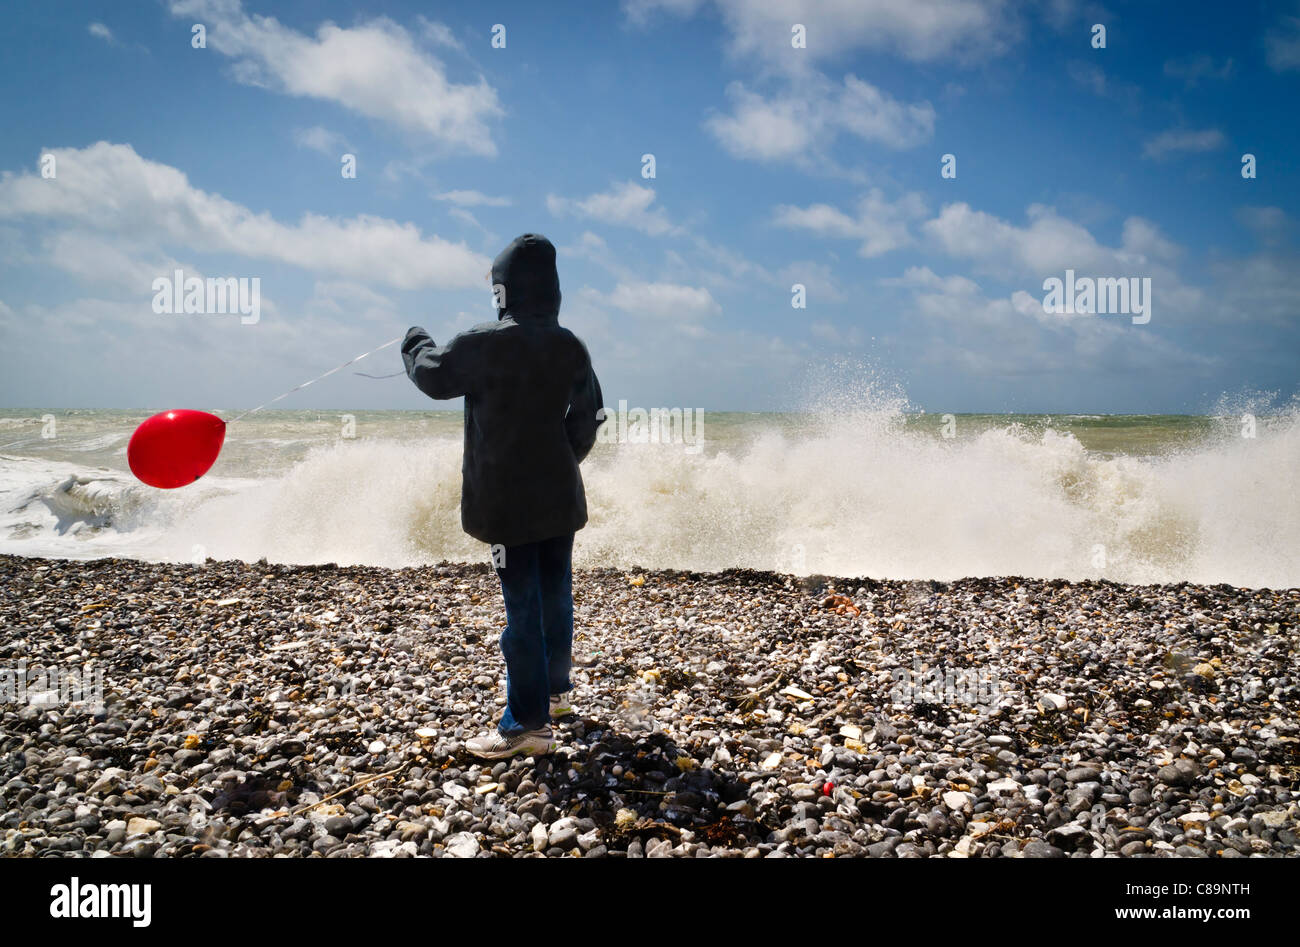 Young child with red ballon on pebble beach Stock Photo